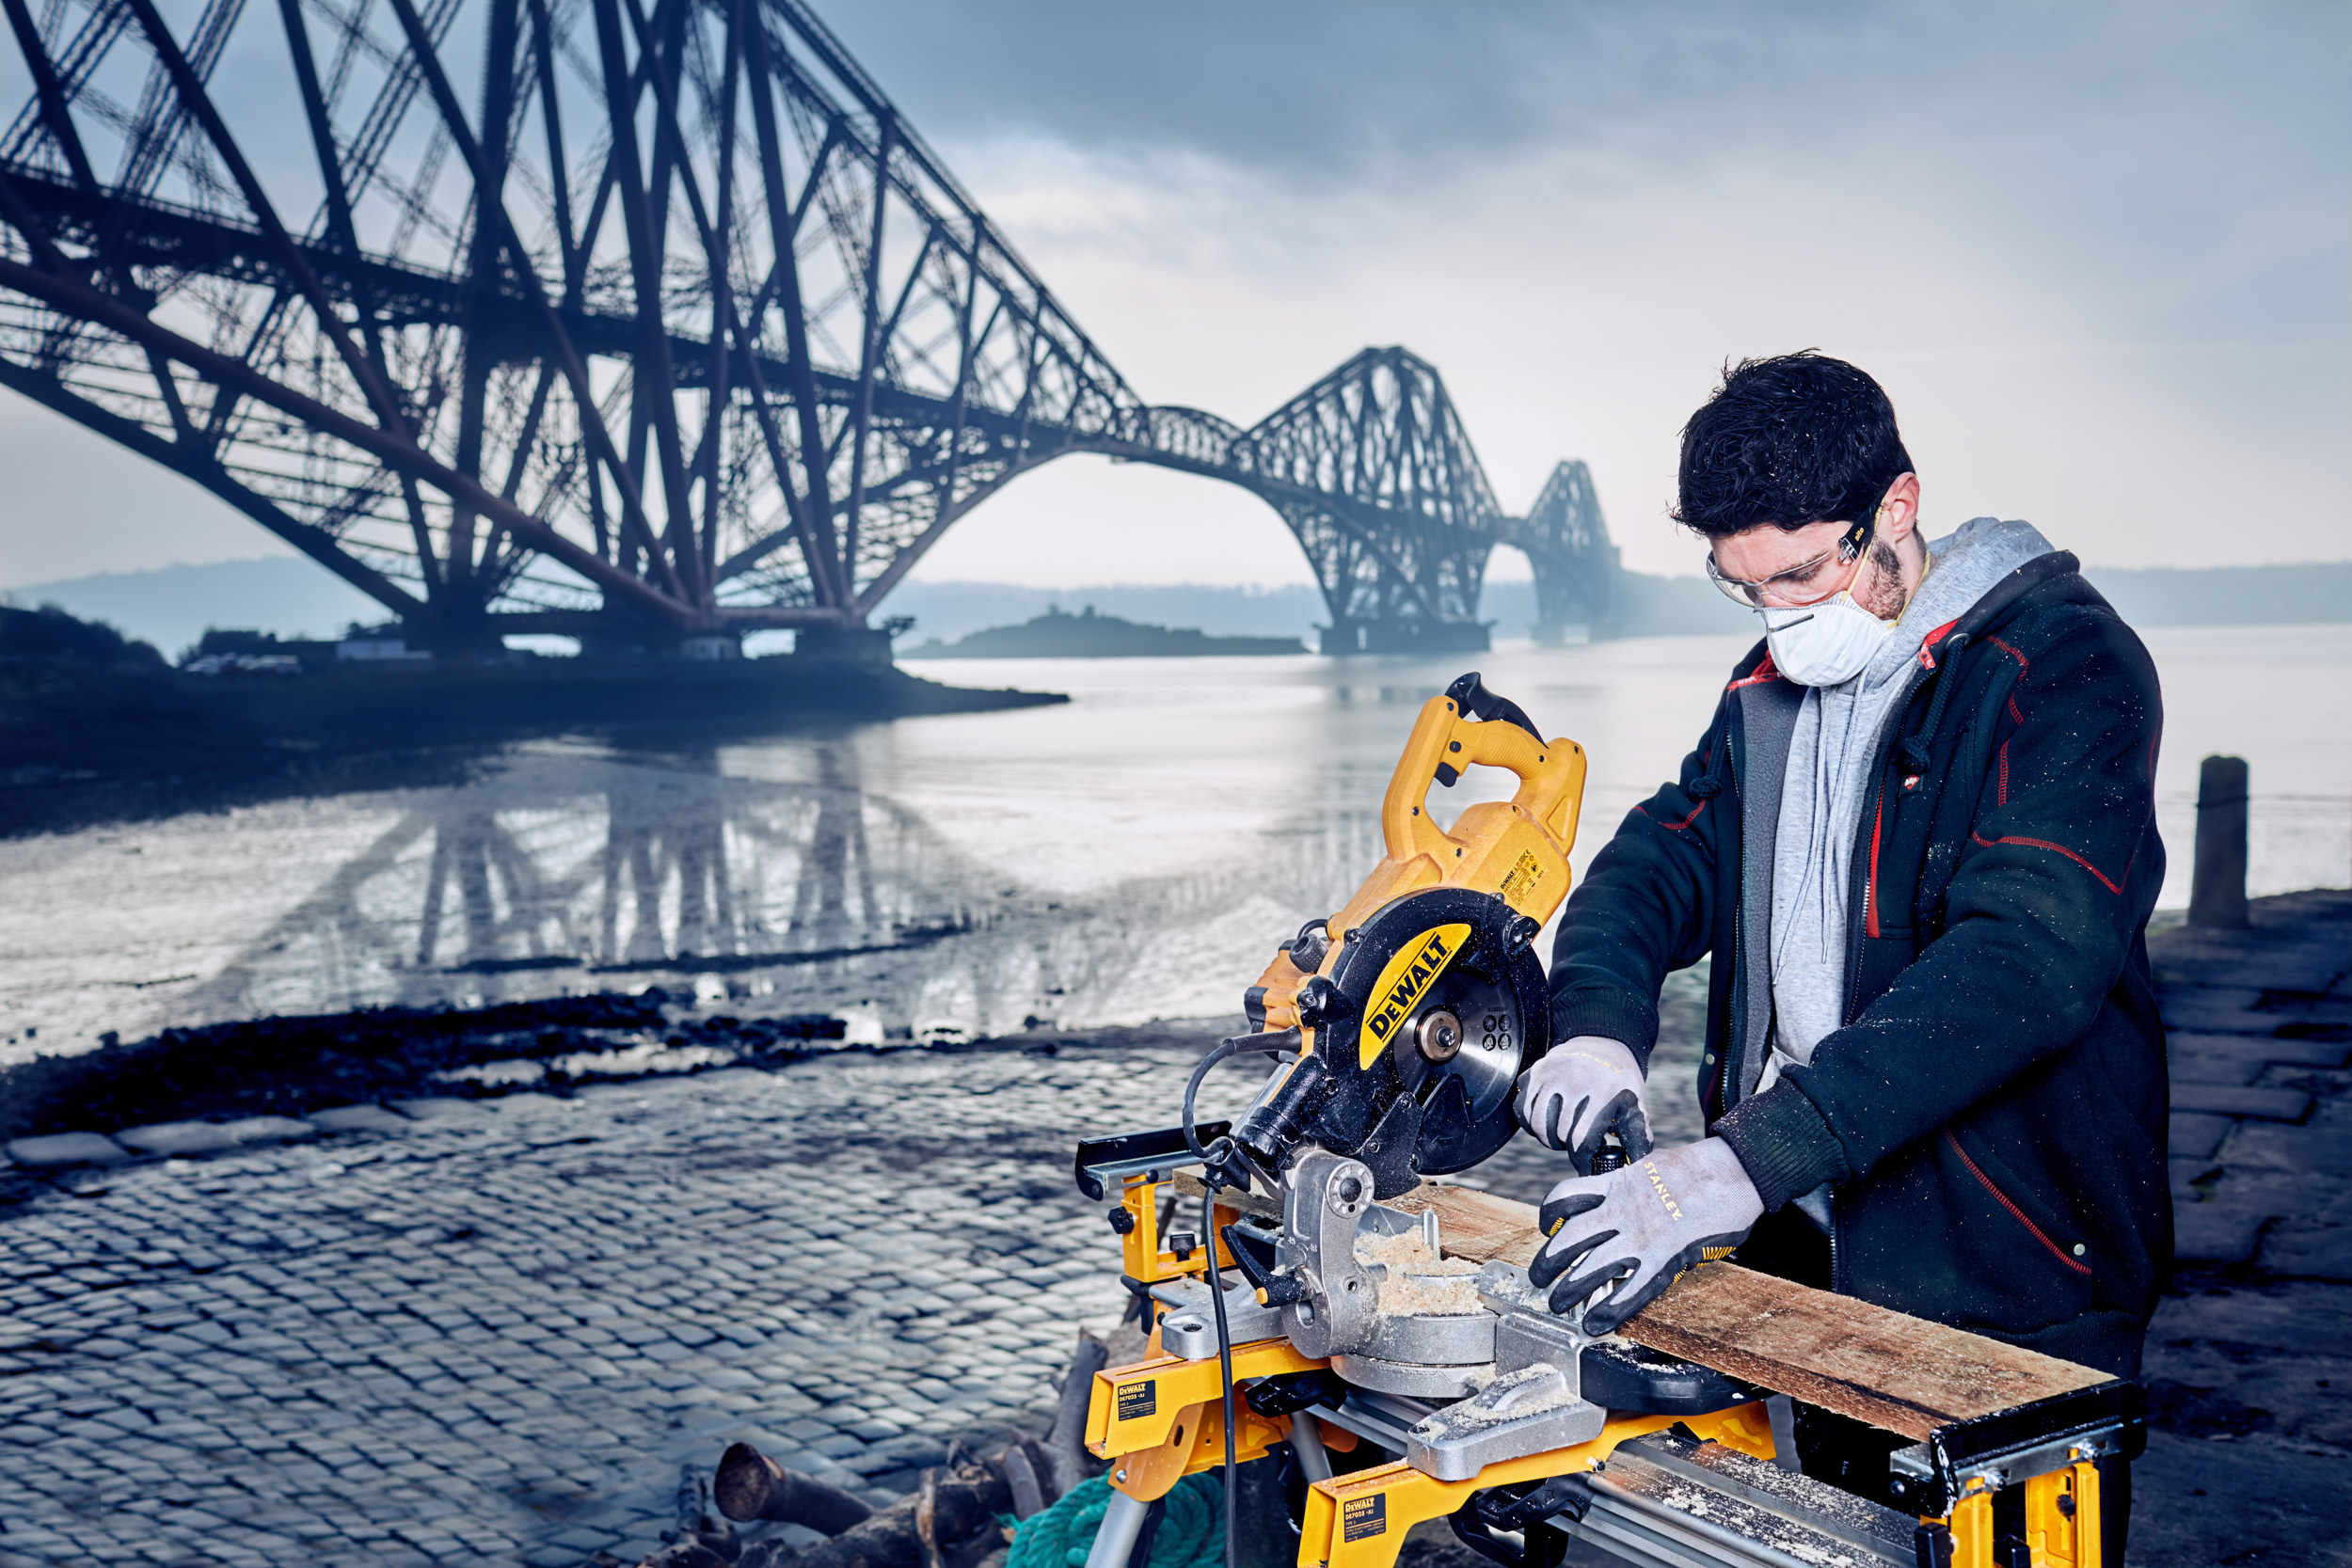 Campaign photography for Screwfix